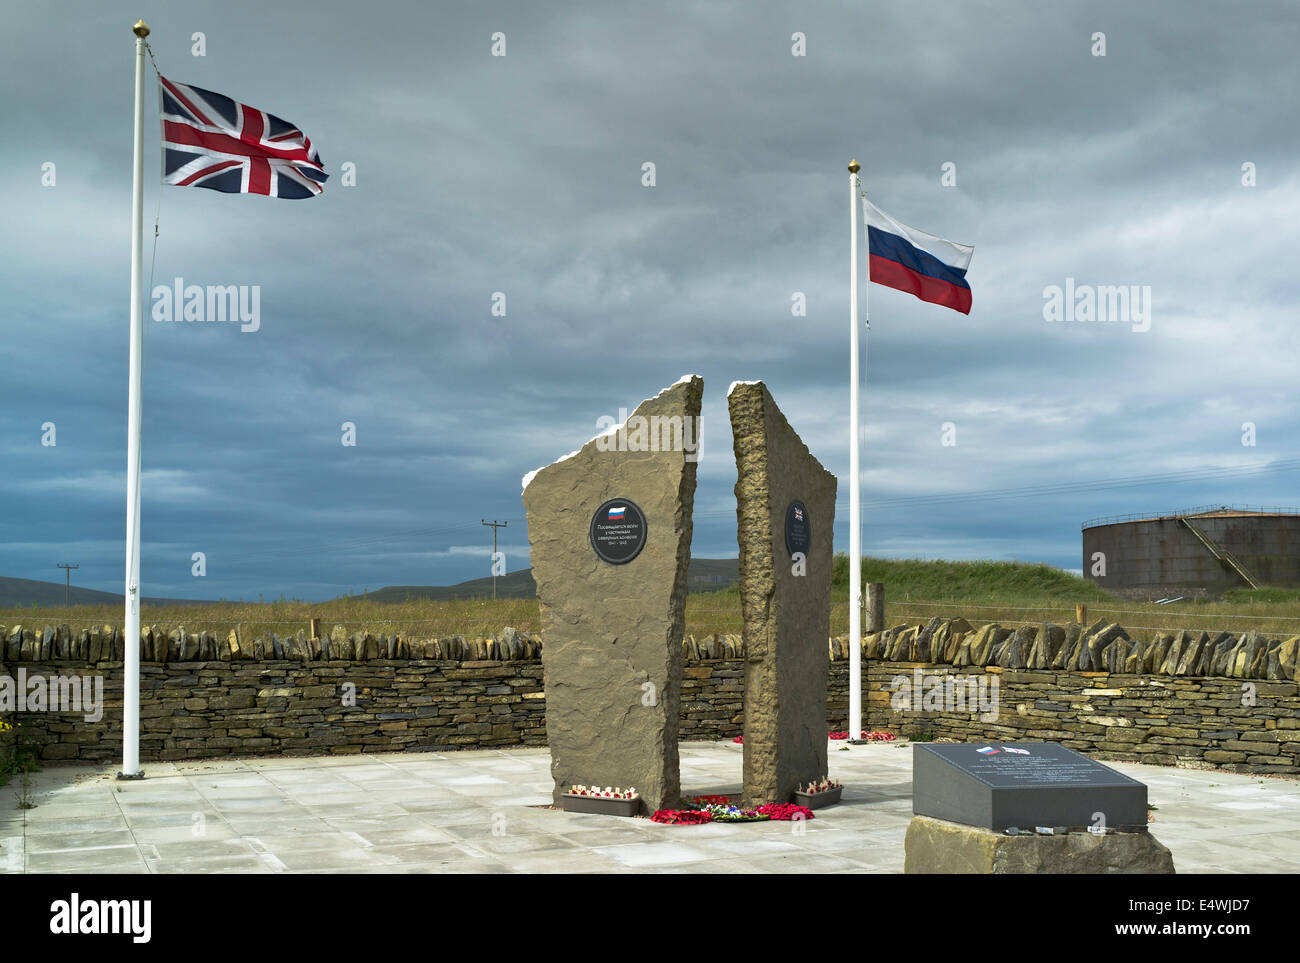 dh Arctic convoy Monument HOY LYNESS ORKNEY SCOTLAND World war ii 2 memorial russian flag and union jack flag ww2 convoys Stock Photo